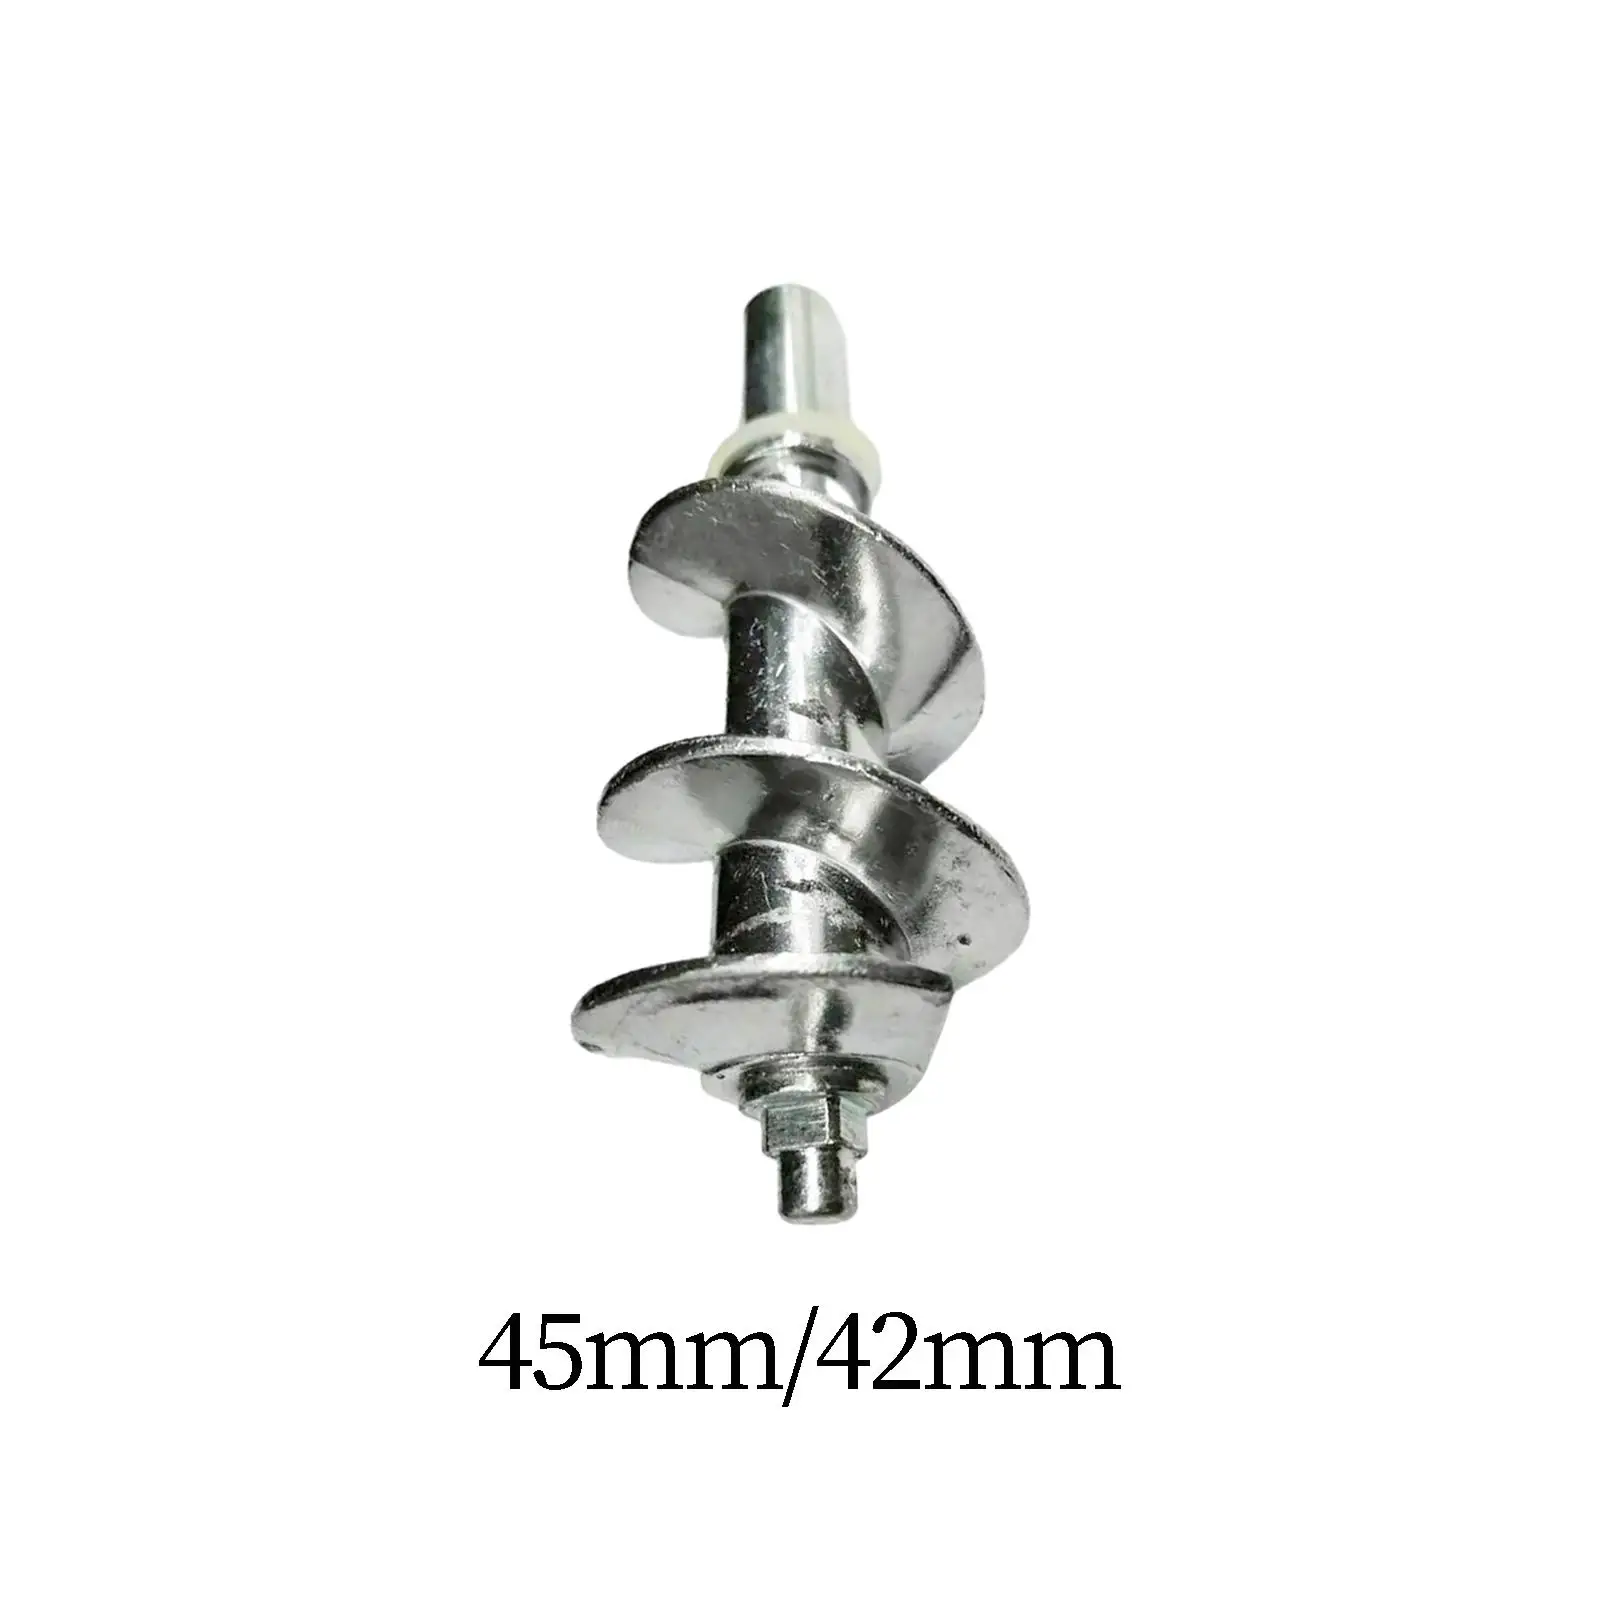 Meat Grinder Screw Auger Home Kitchen Accessories Replacement Meat Grinder Screw for Pmg 2008 M01M150 G20prpwdr PN005 mm0407jsw